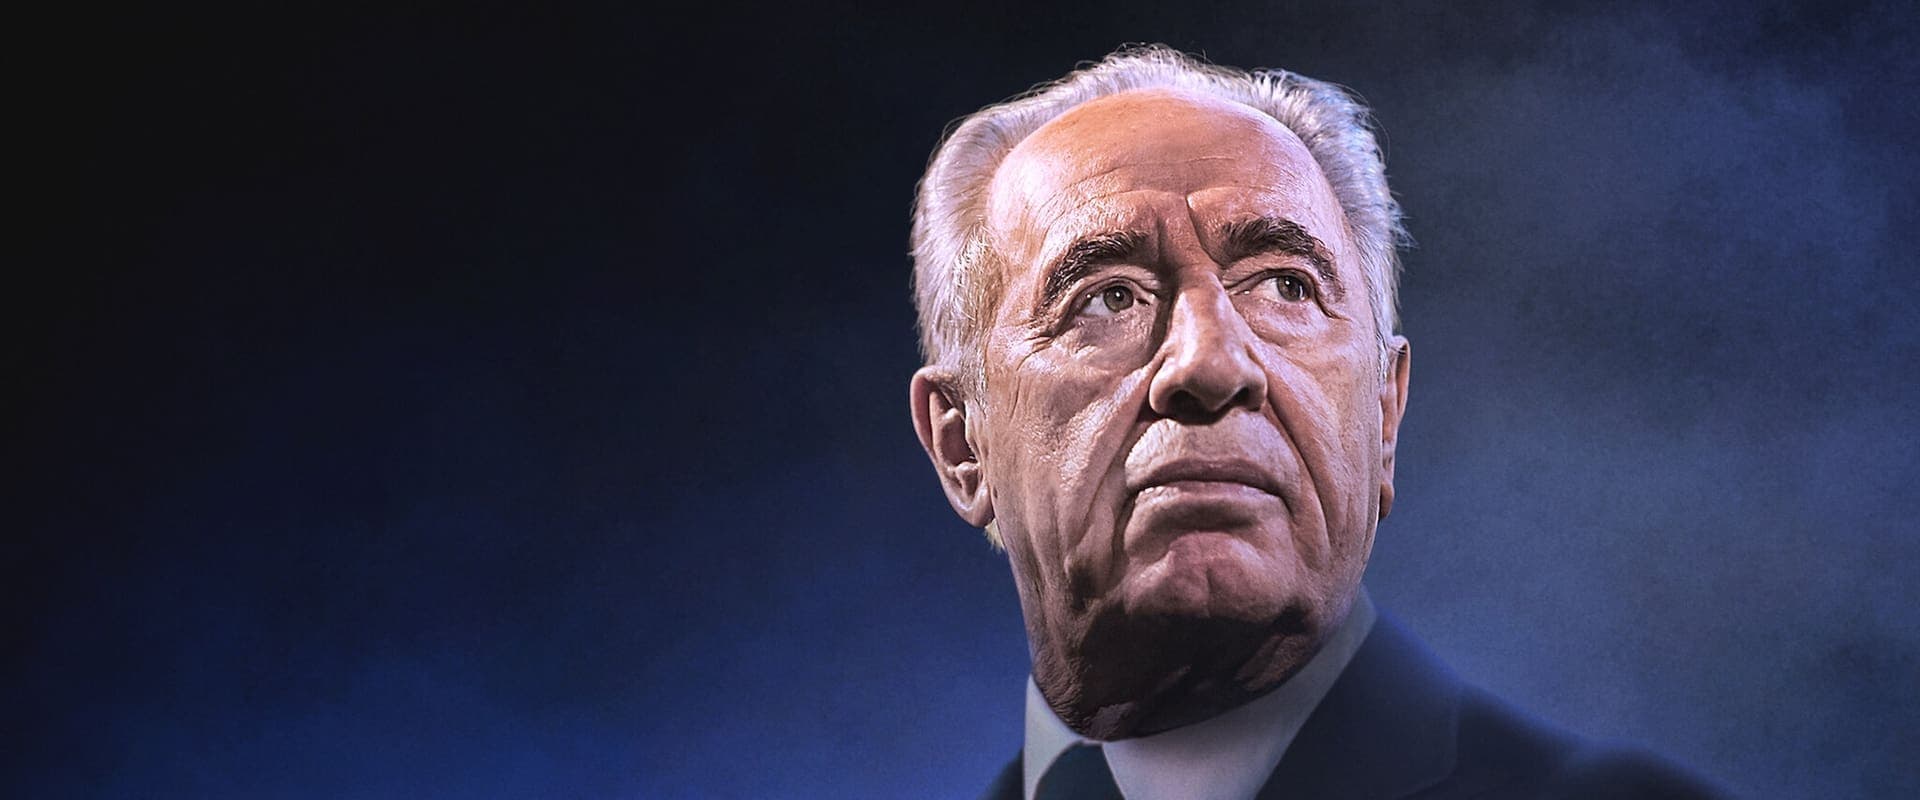 Never Stop Dreaming: The Life and Legacy of Shimon Peres